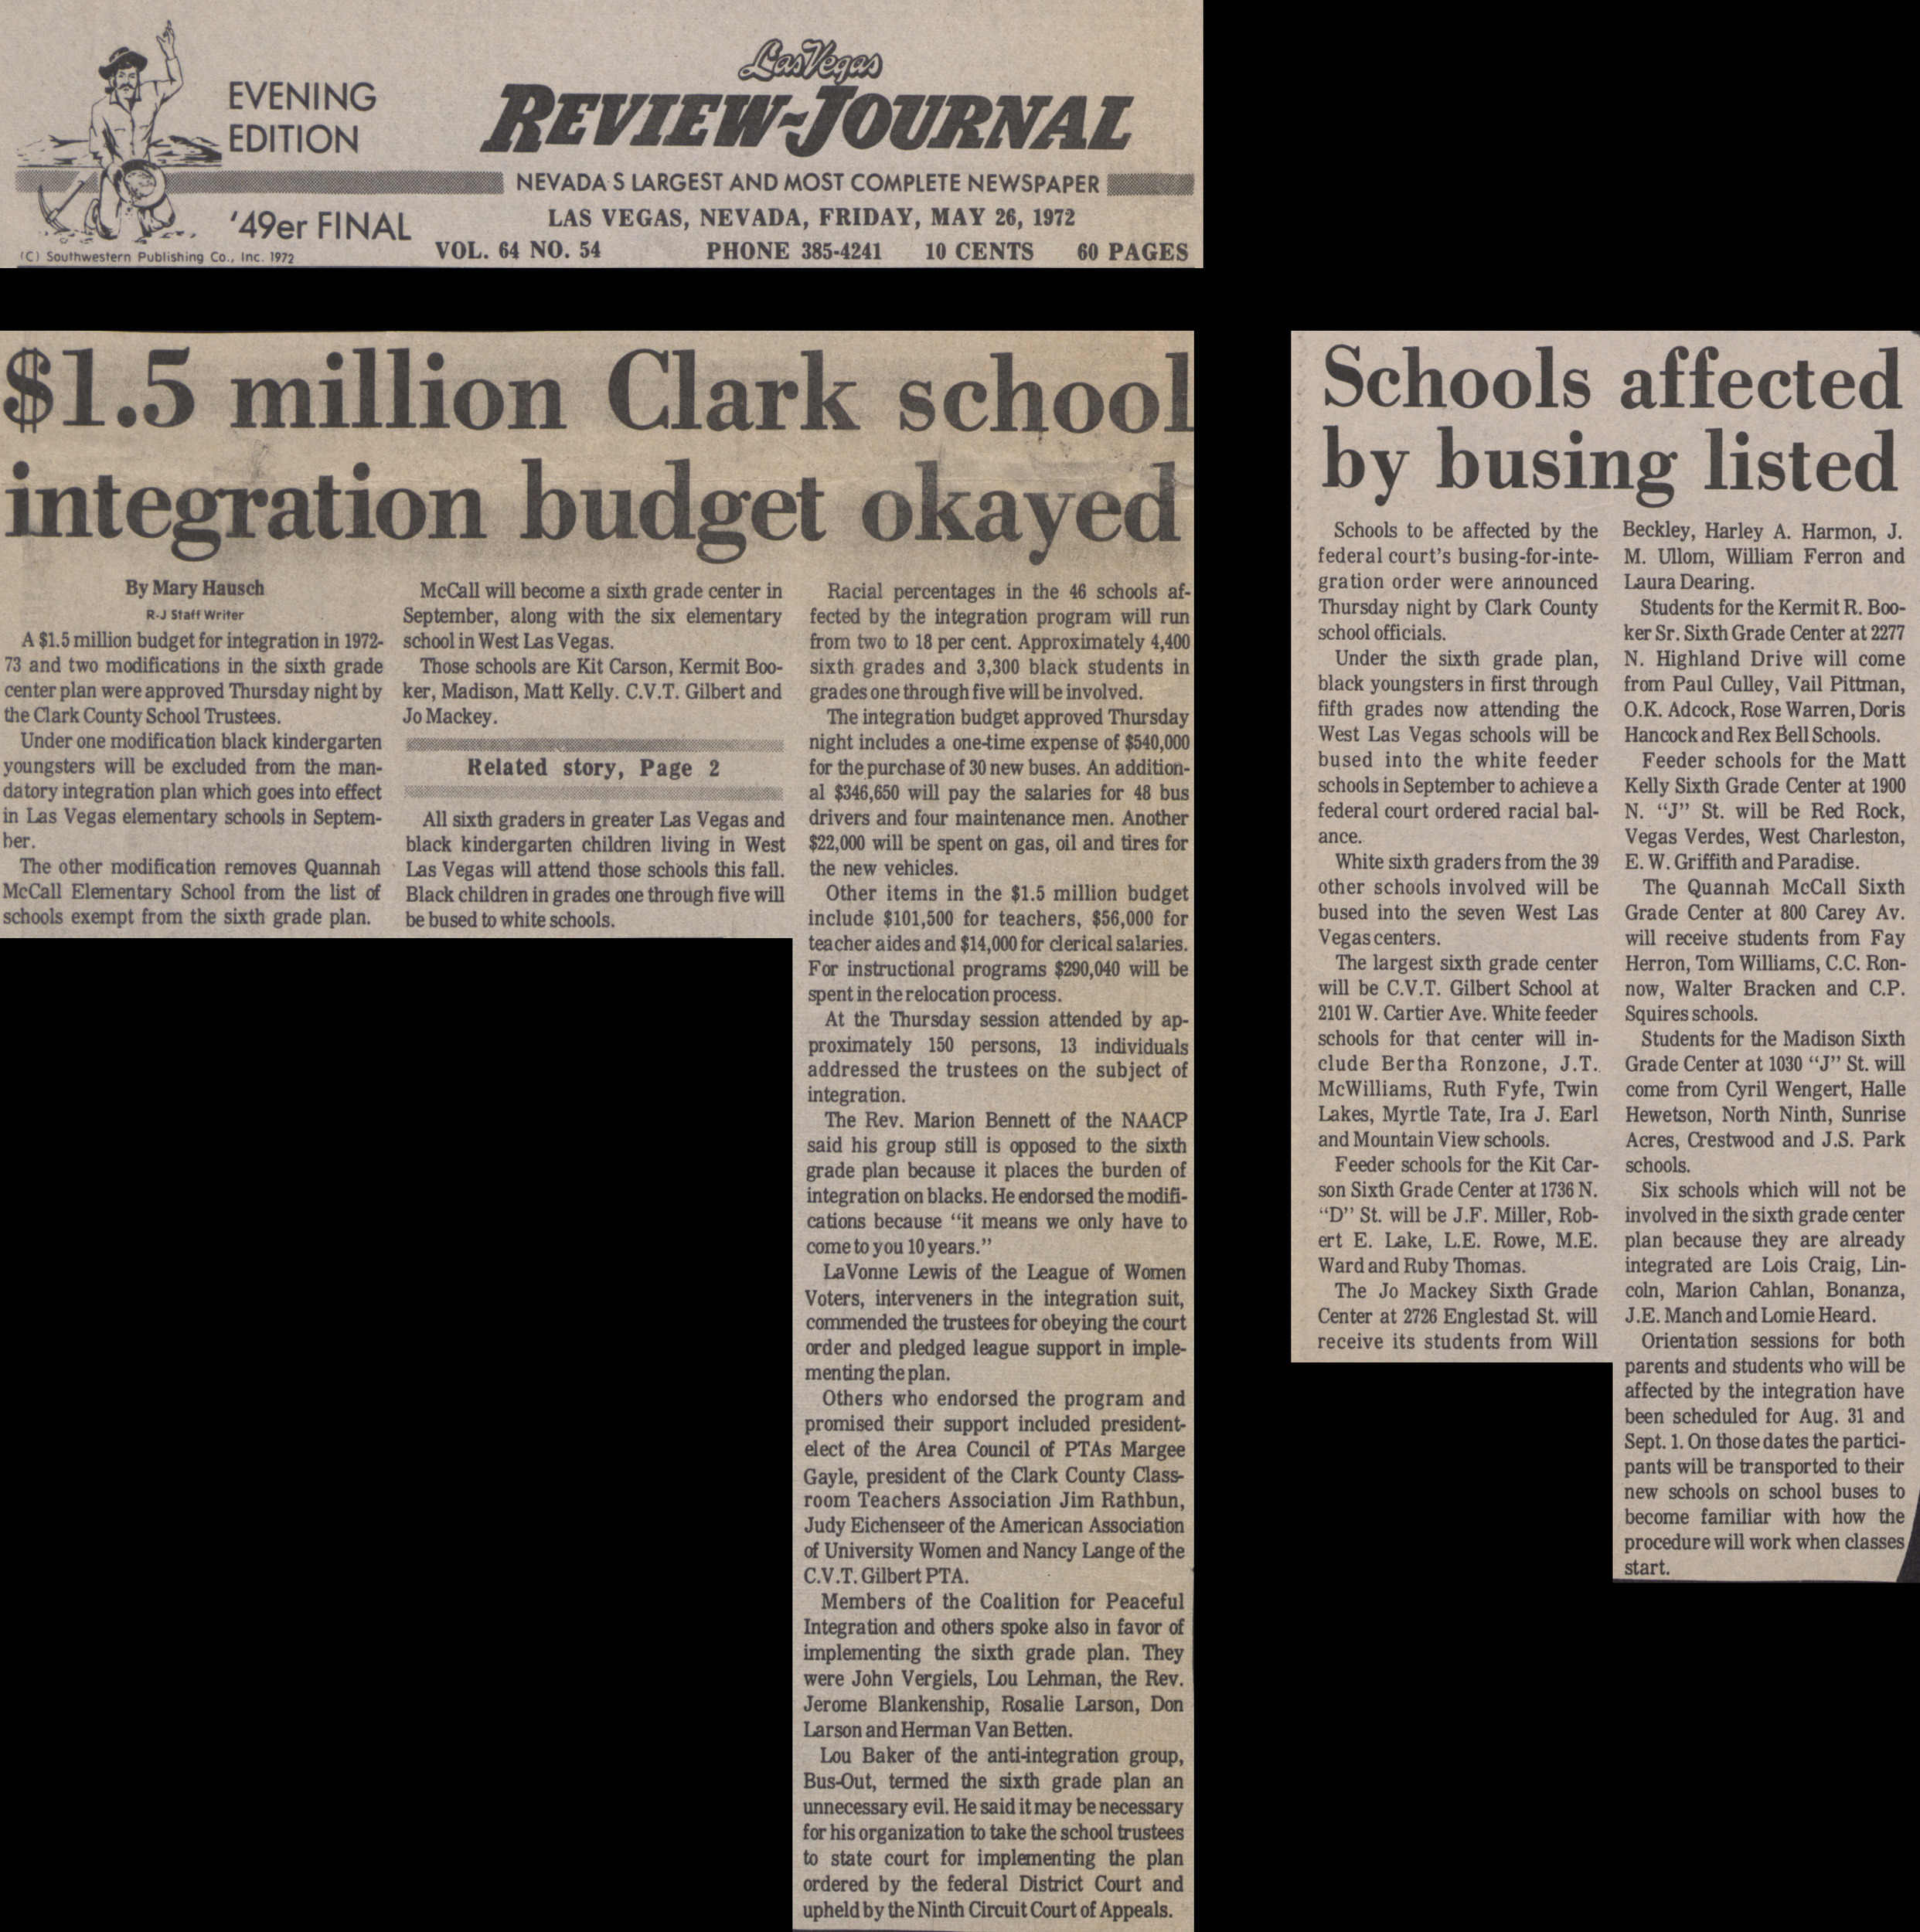 Newspaper clipping, $1.5 million Clark school integration budget okayed; and, Schools affected by busing listed, Las Vegas Review-Journal, evening edition, May 26, 1972